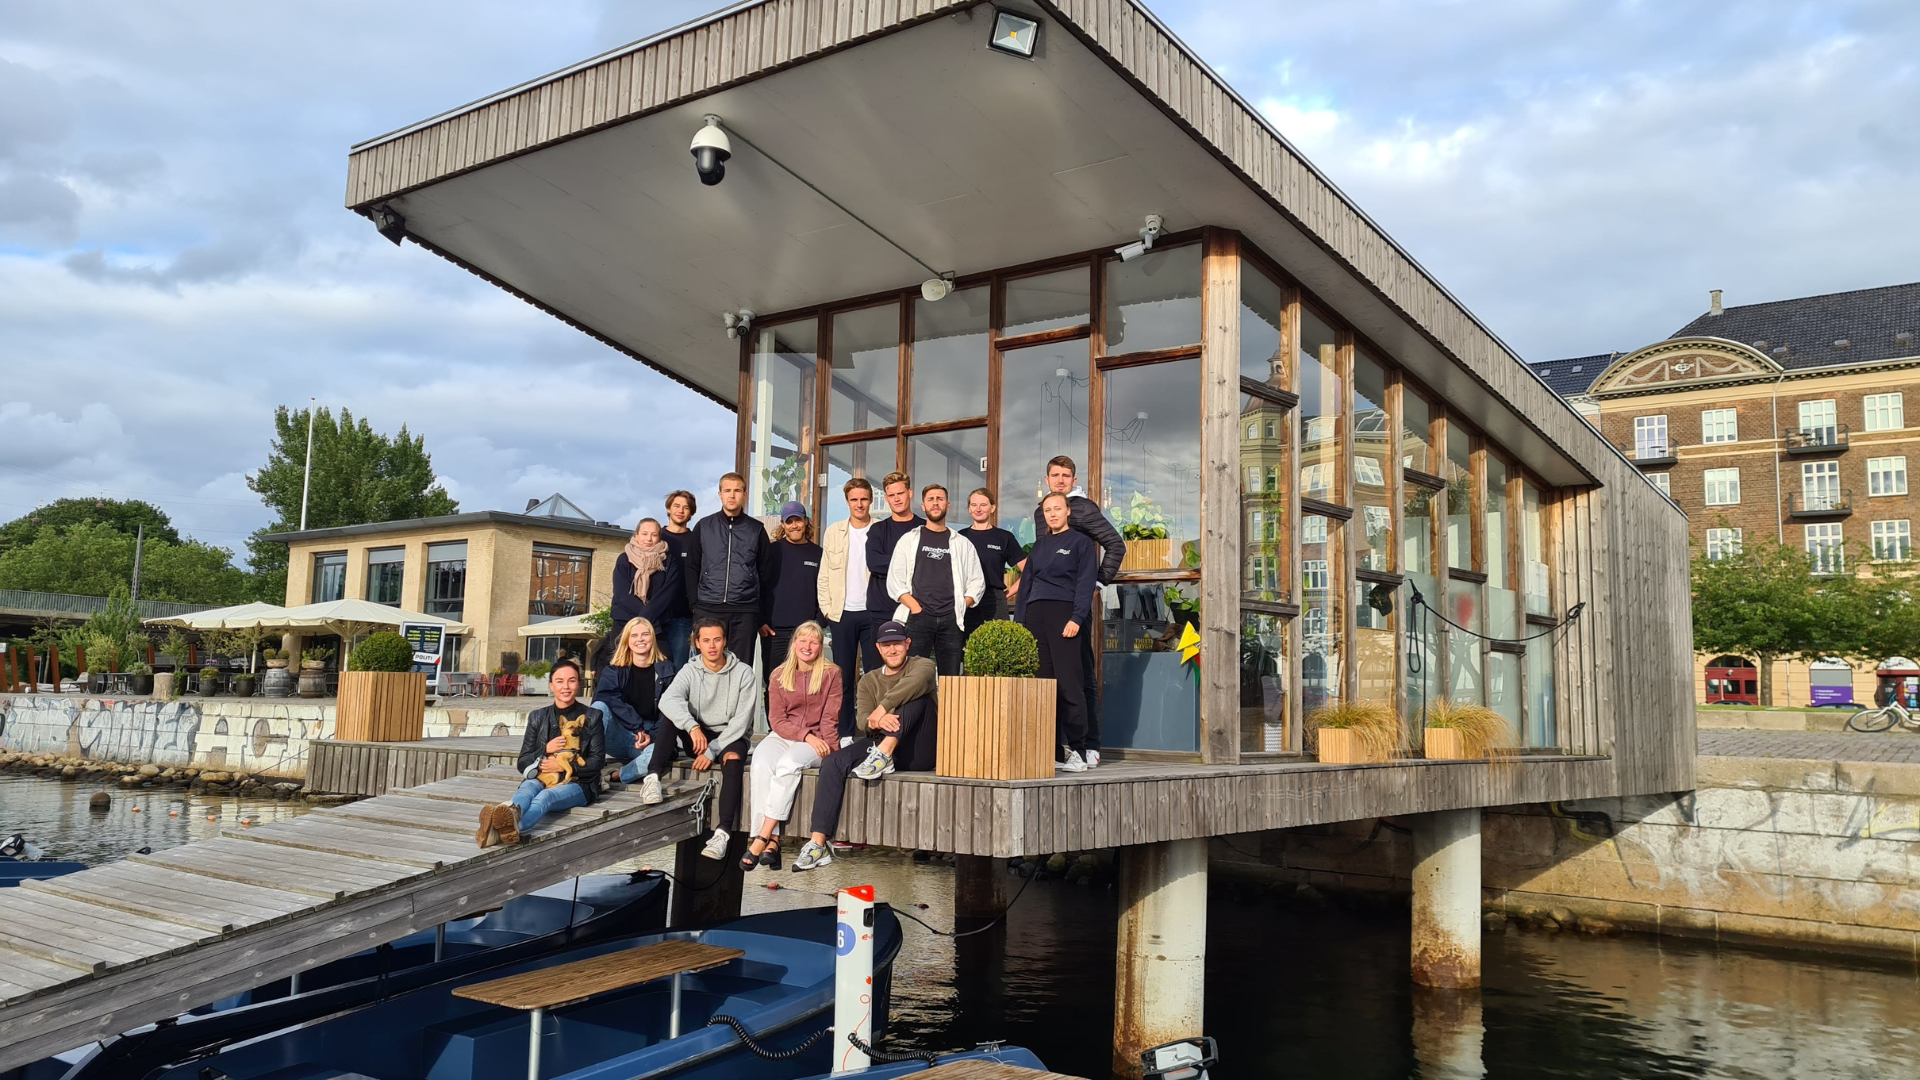 GoBoat Crew at Islands Brygge